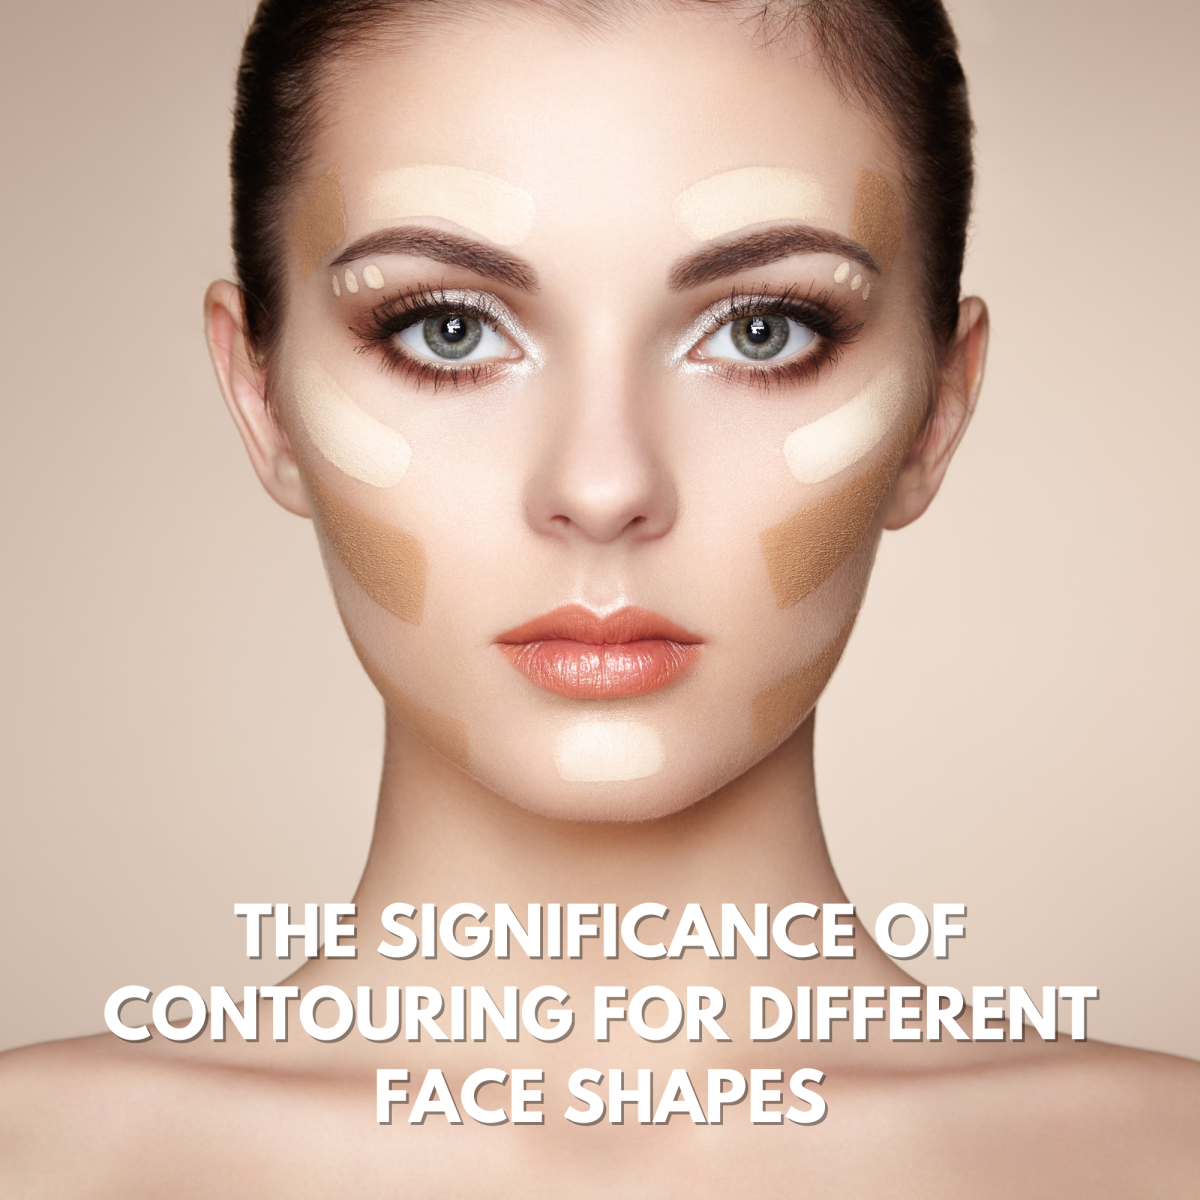 Contouring for Different Face Shapes: How to Enhance Your Features